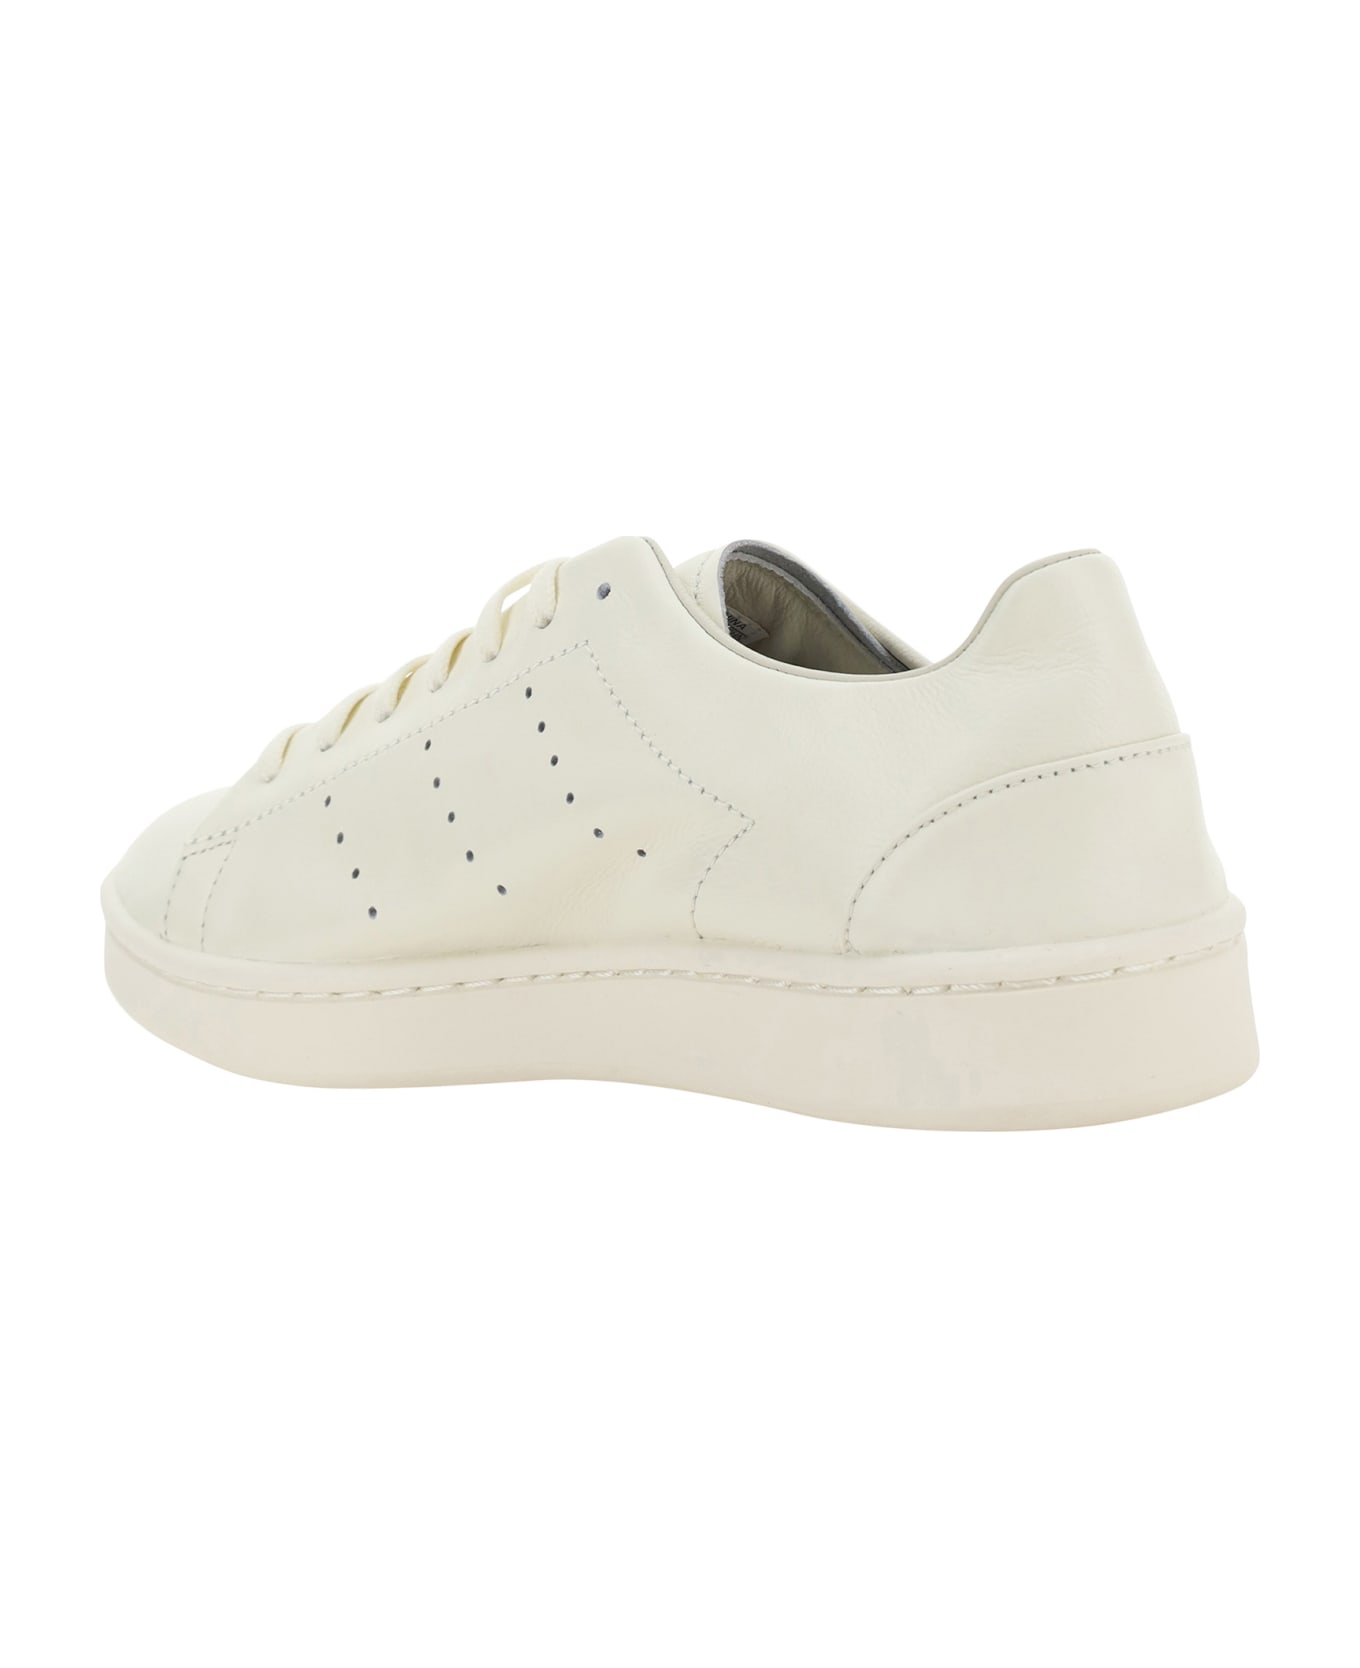 Y-3 Stan Smith Sneakers - Owhite スニーカー